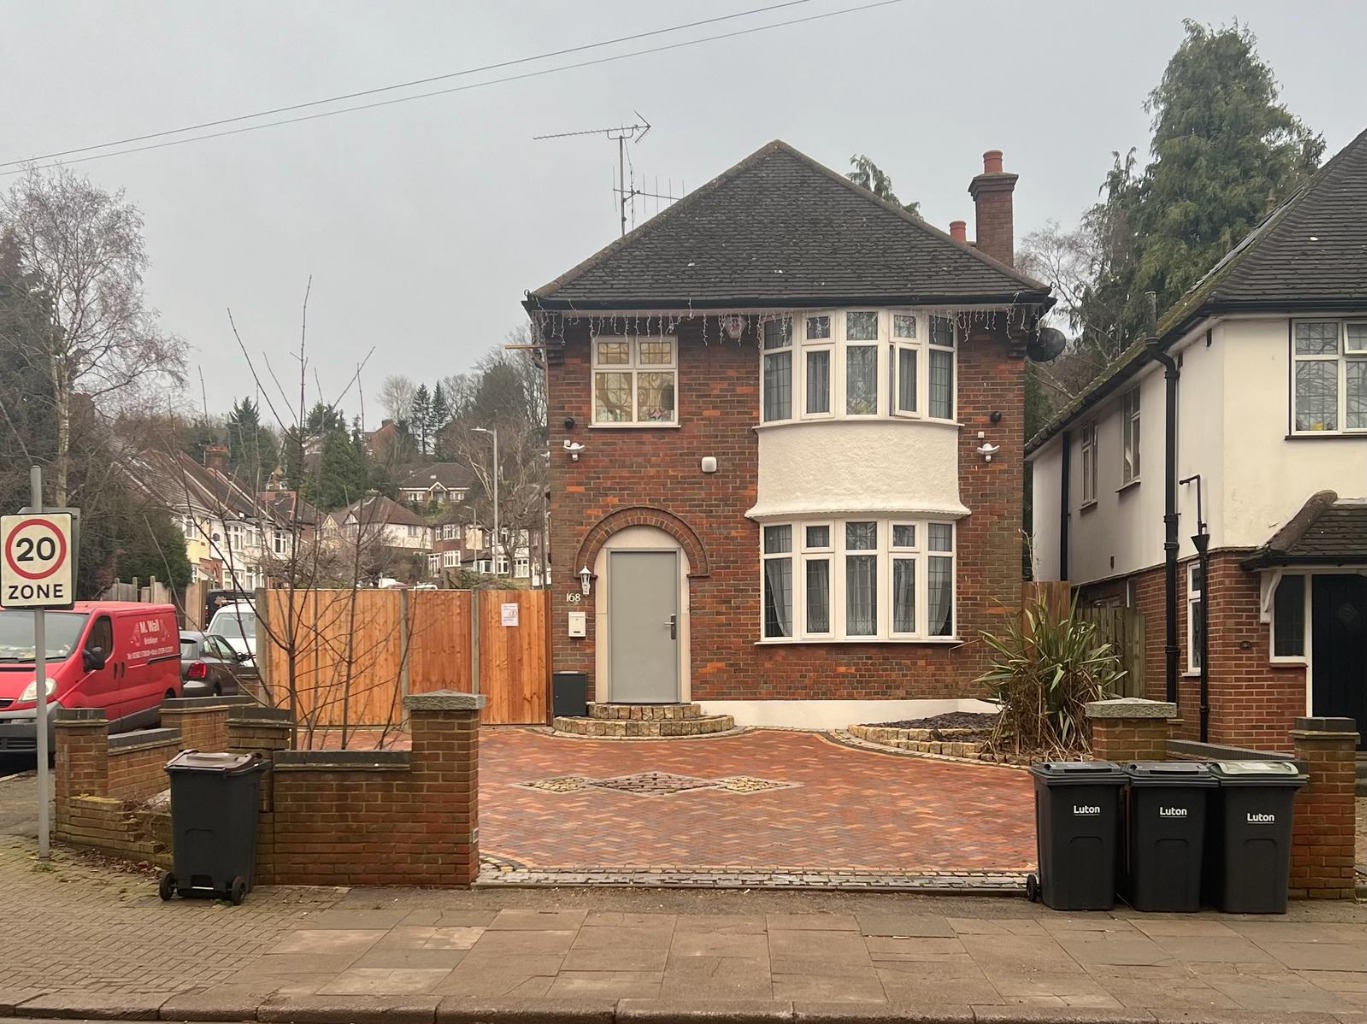 3 bed detached house for sale in Old Bedford Road, Luton, LU2 